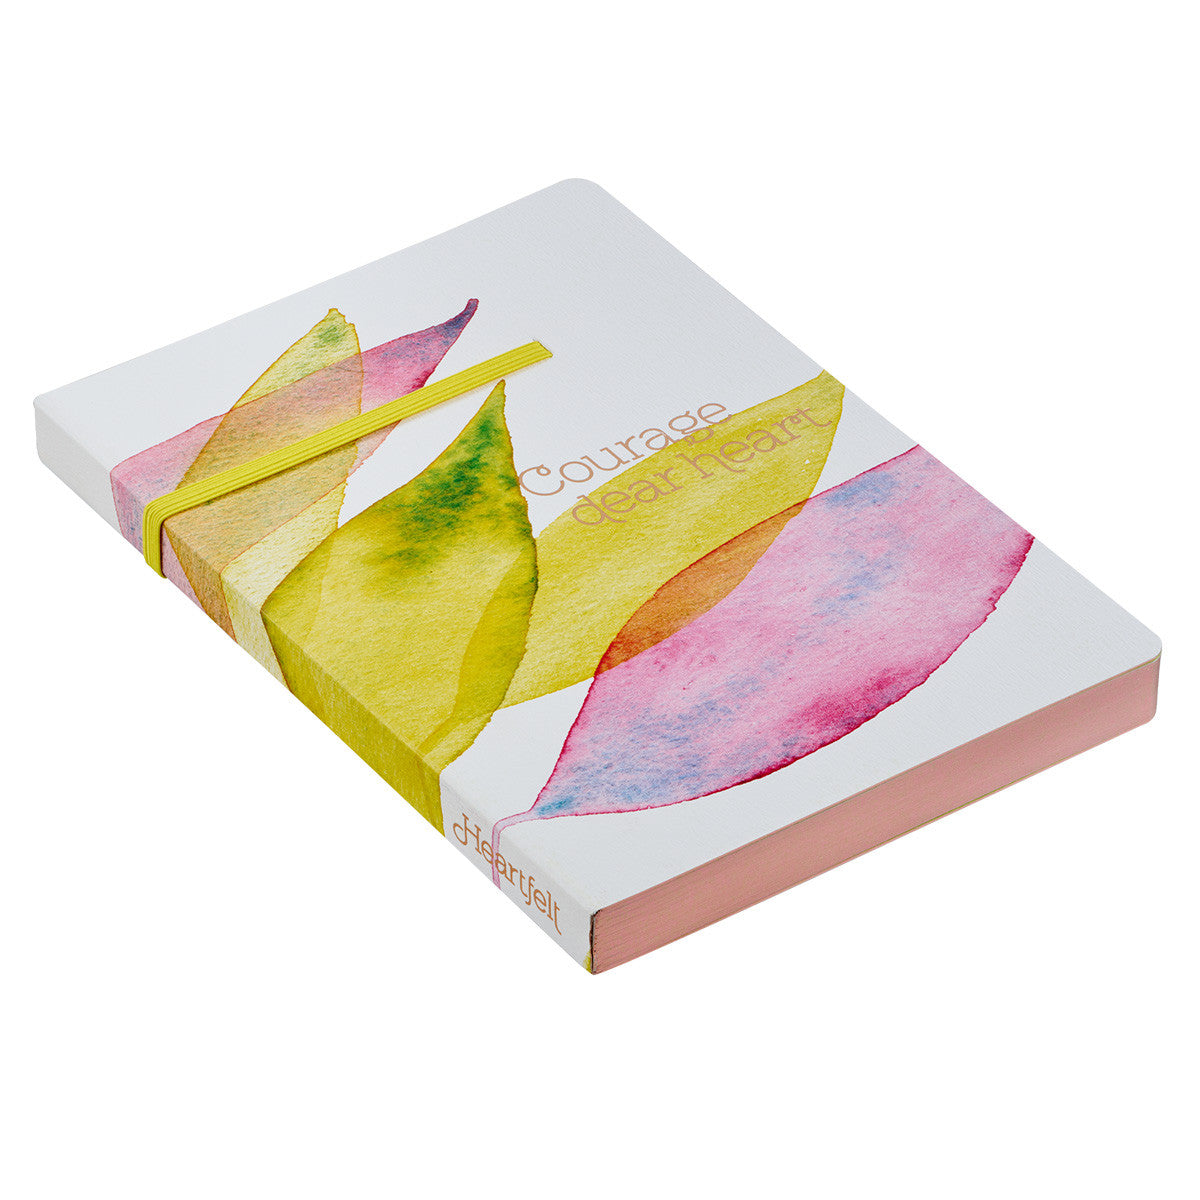 Courage Dear Heart Citrus Leaves Flexcover Journal with Elastic Closure - The Christian Gift Company